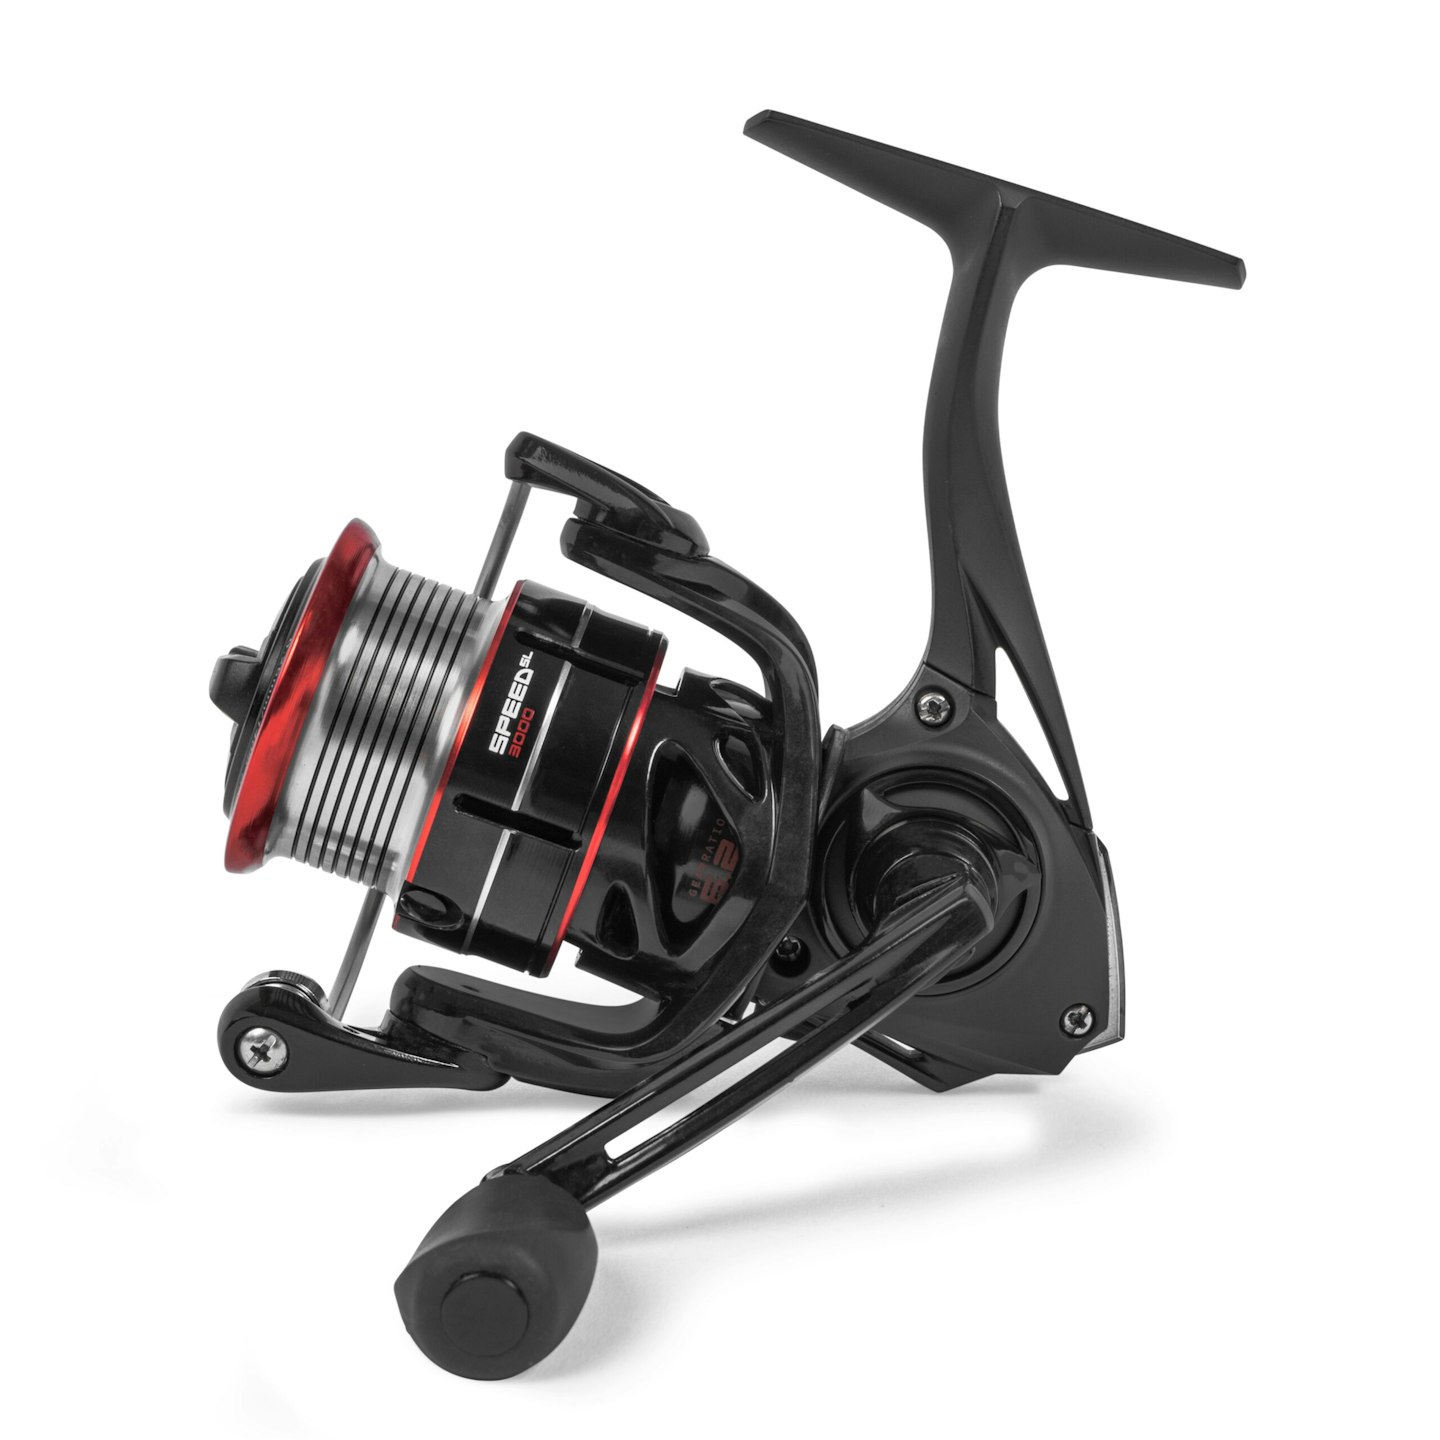 The best spinning reels